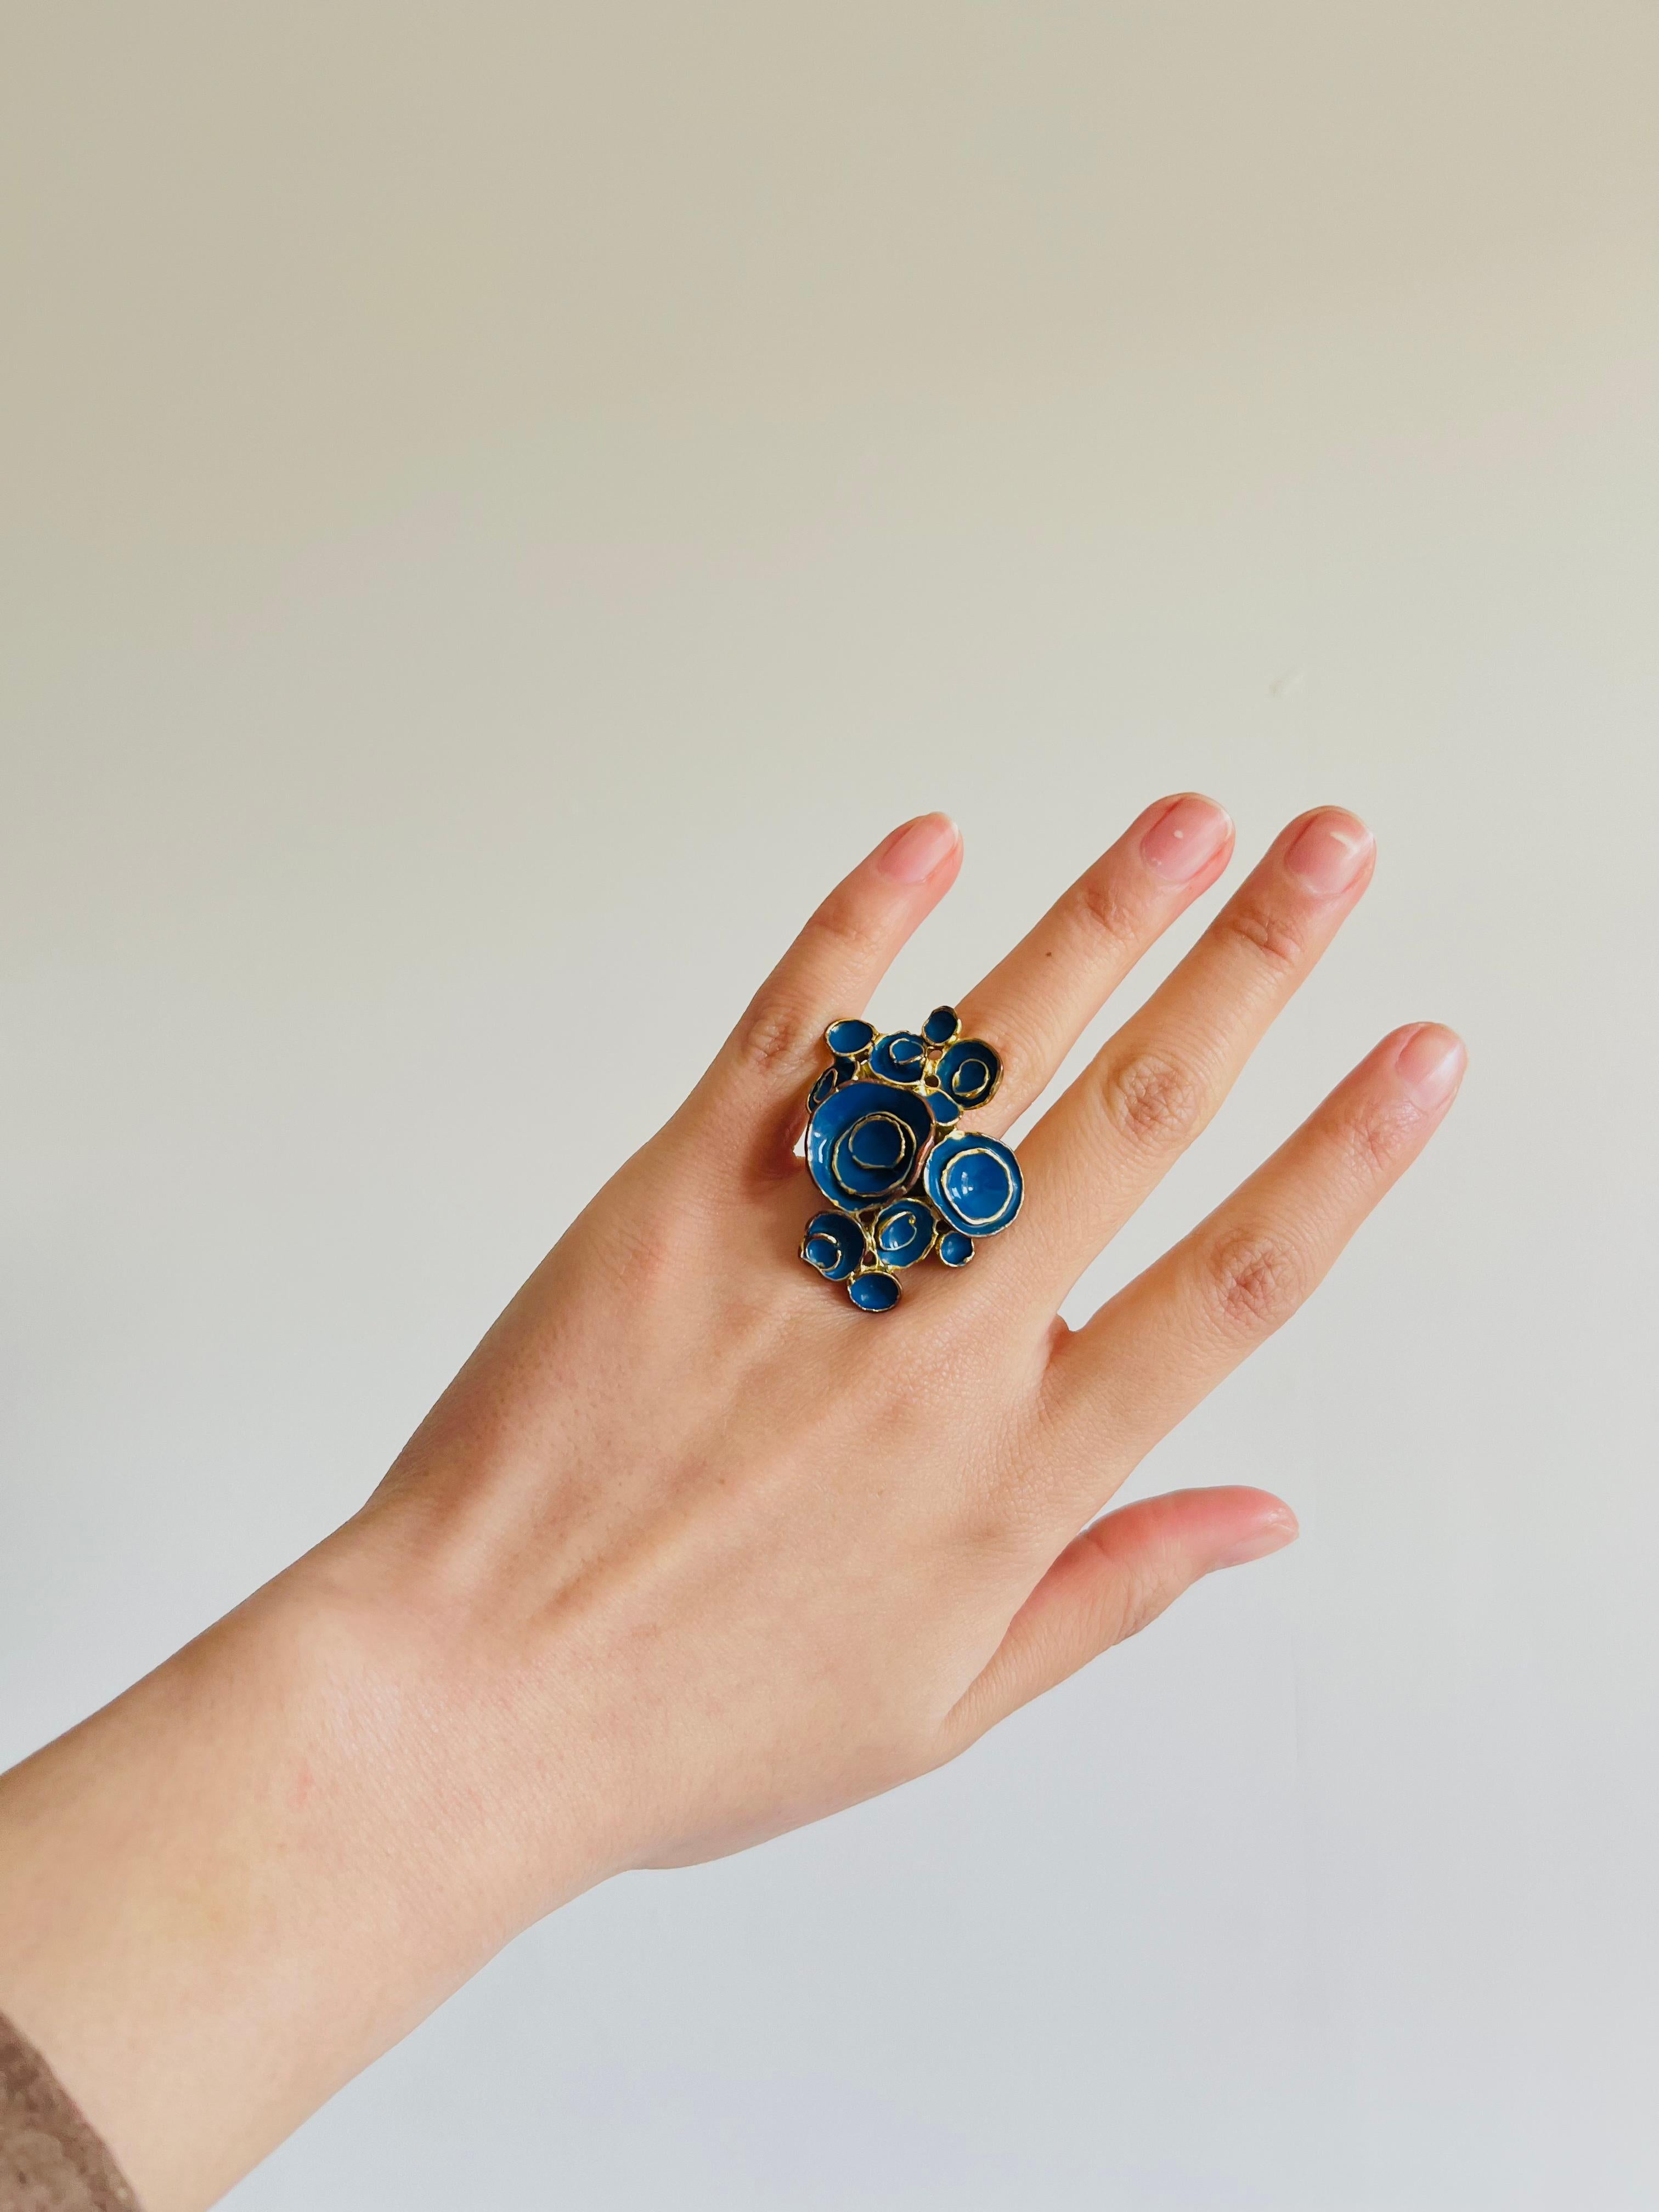 Yves Saint Laurent YSL Arty Navy Cluster Flowers Statement Chunky Ring, Size 6 In Good Condition For Sale In Wokingham, England